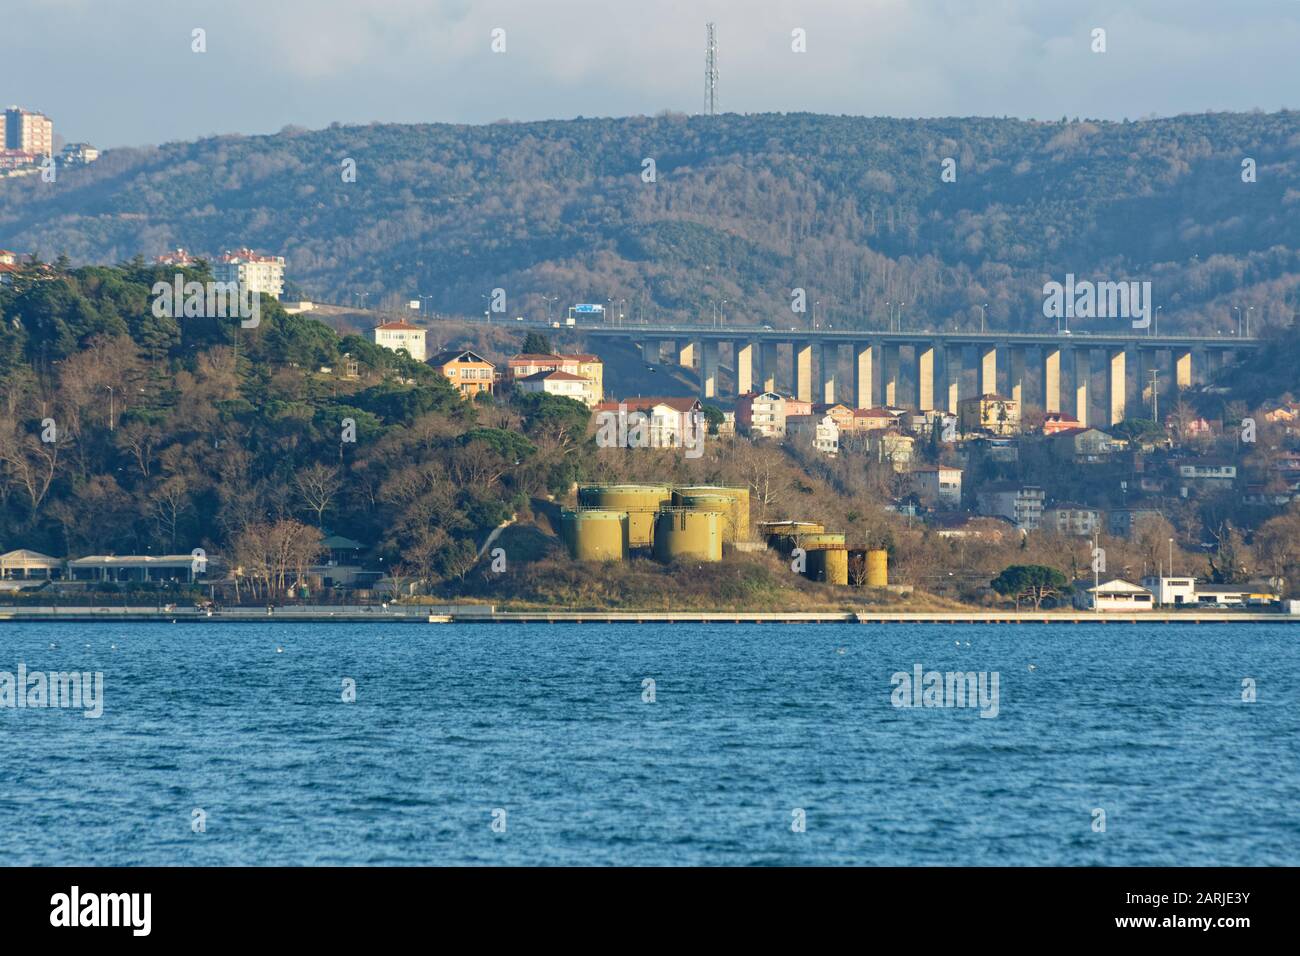 Petroleum products, fuel storage tanks in an old abandoned filling facility on the shore of Cubuklu / Bosphorus Strait in Istanbul. Stock Photo